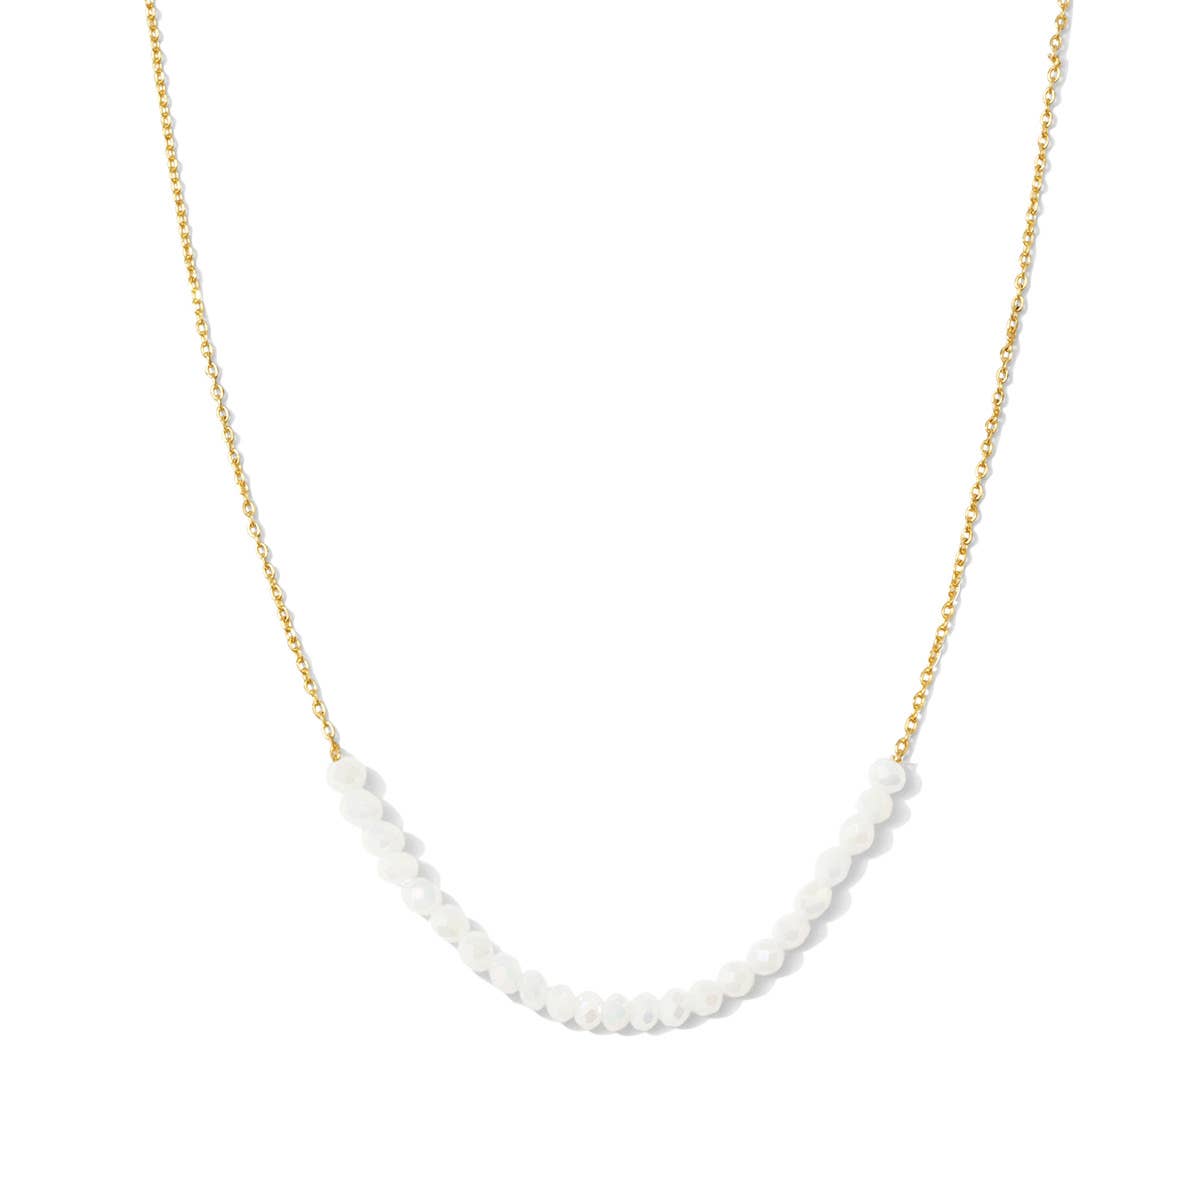 Splendid Iris - Delicate Crystal Accented Necklace: Peach